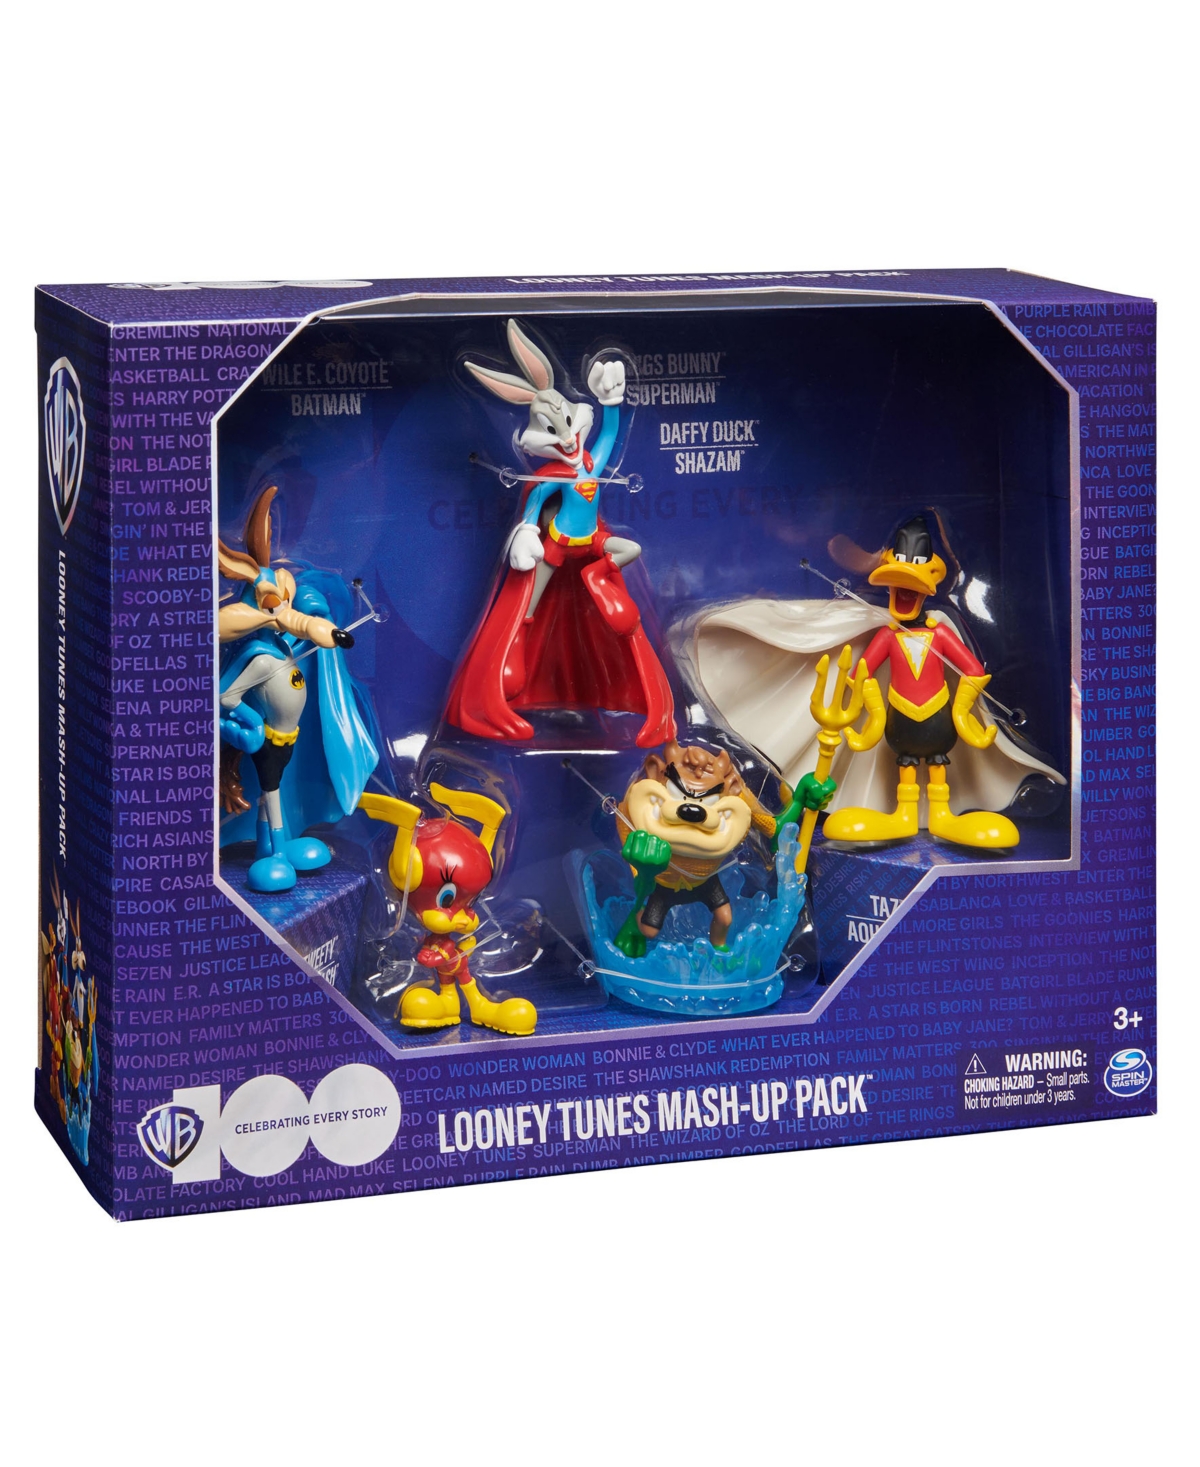 Shop Dc Comics , Looney Tunes Mash-up Pack, Limited Edition Wb 100 Years Anniversary, 5 Looney Tunes X Dc Figures In Multi-color